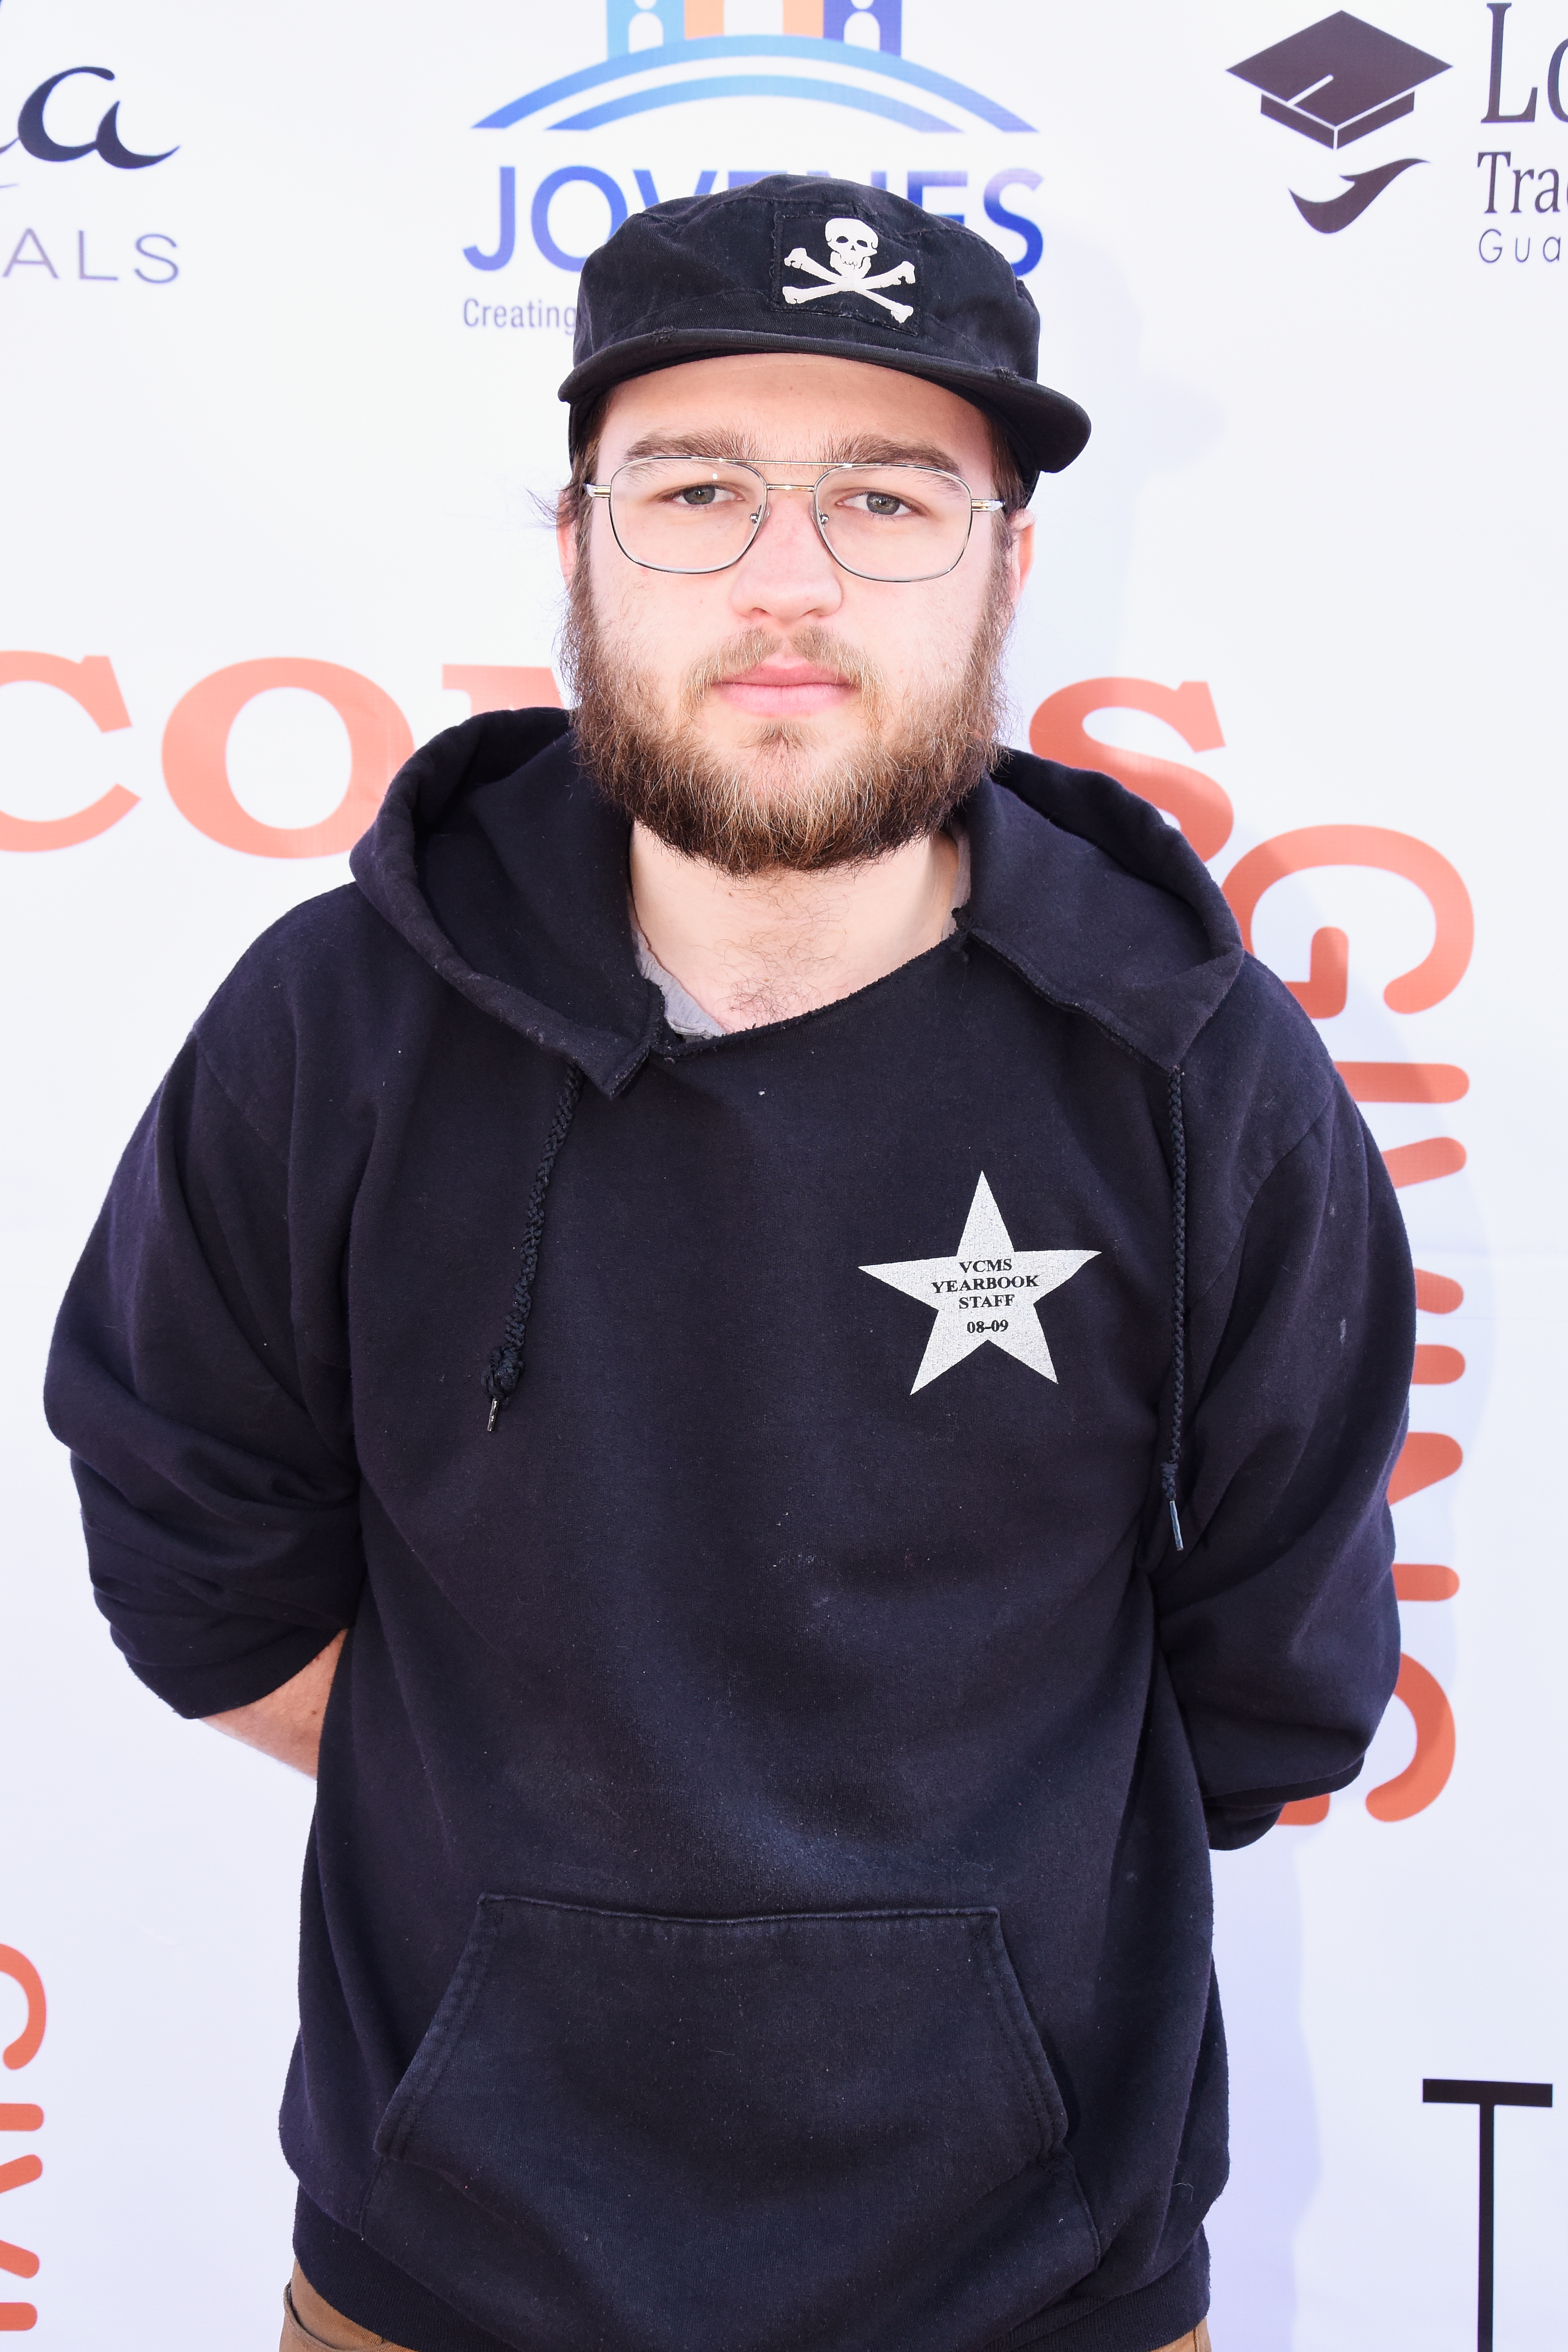 Angus T. Jones attends the 1st Annual Combsgiving Festival in Los Angeles in 2016 | Source: Getty images